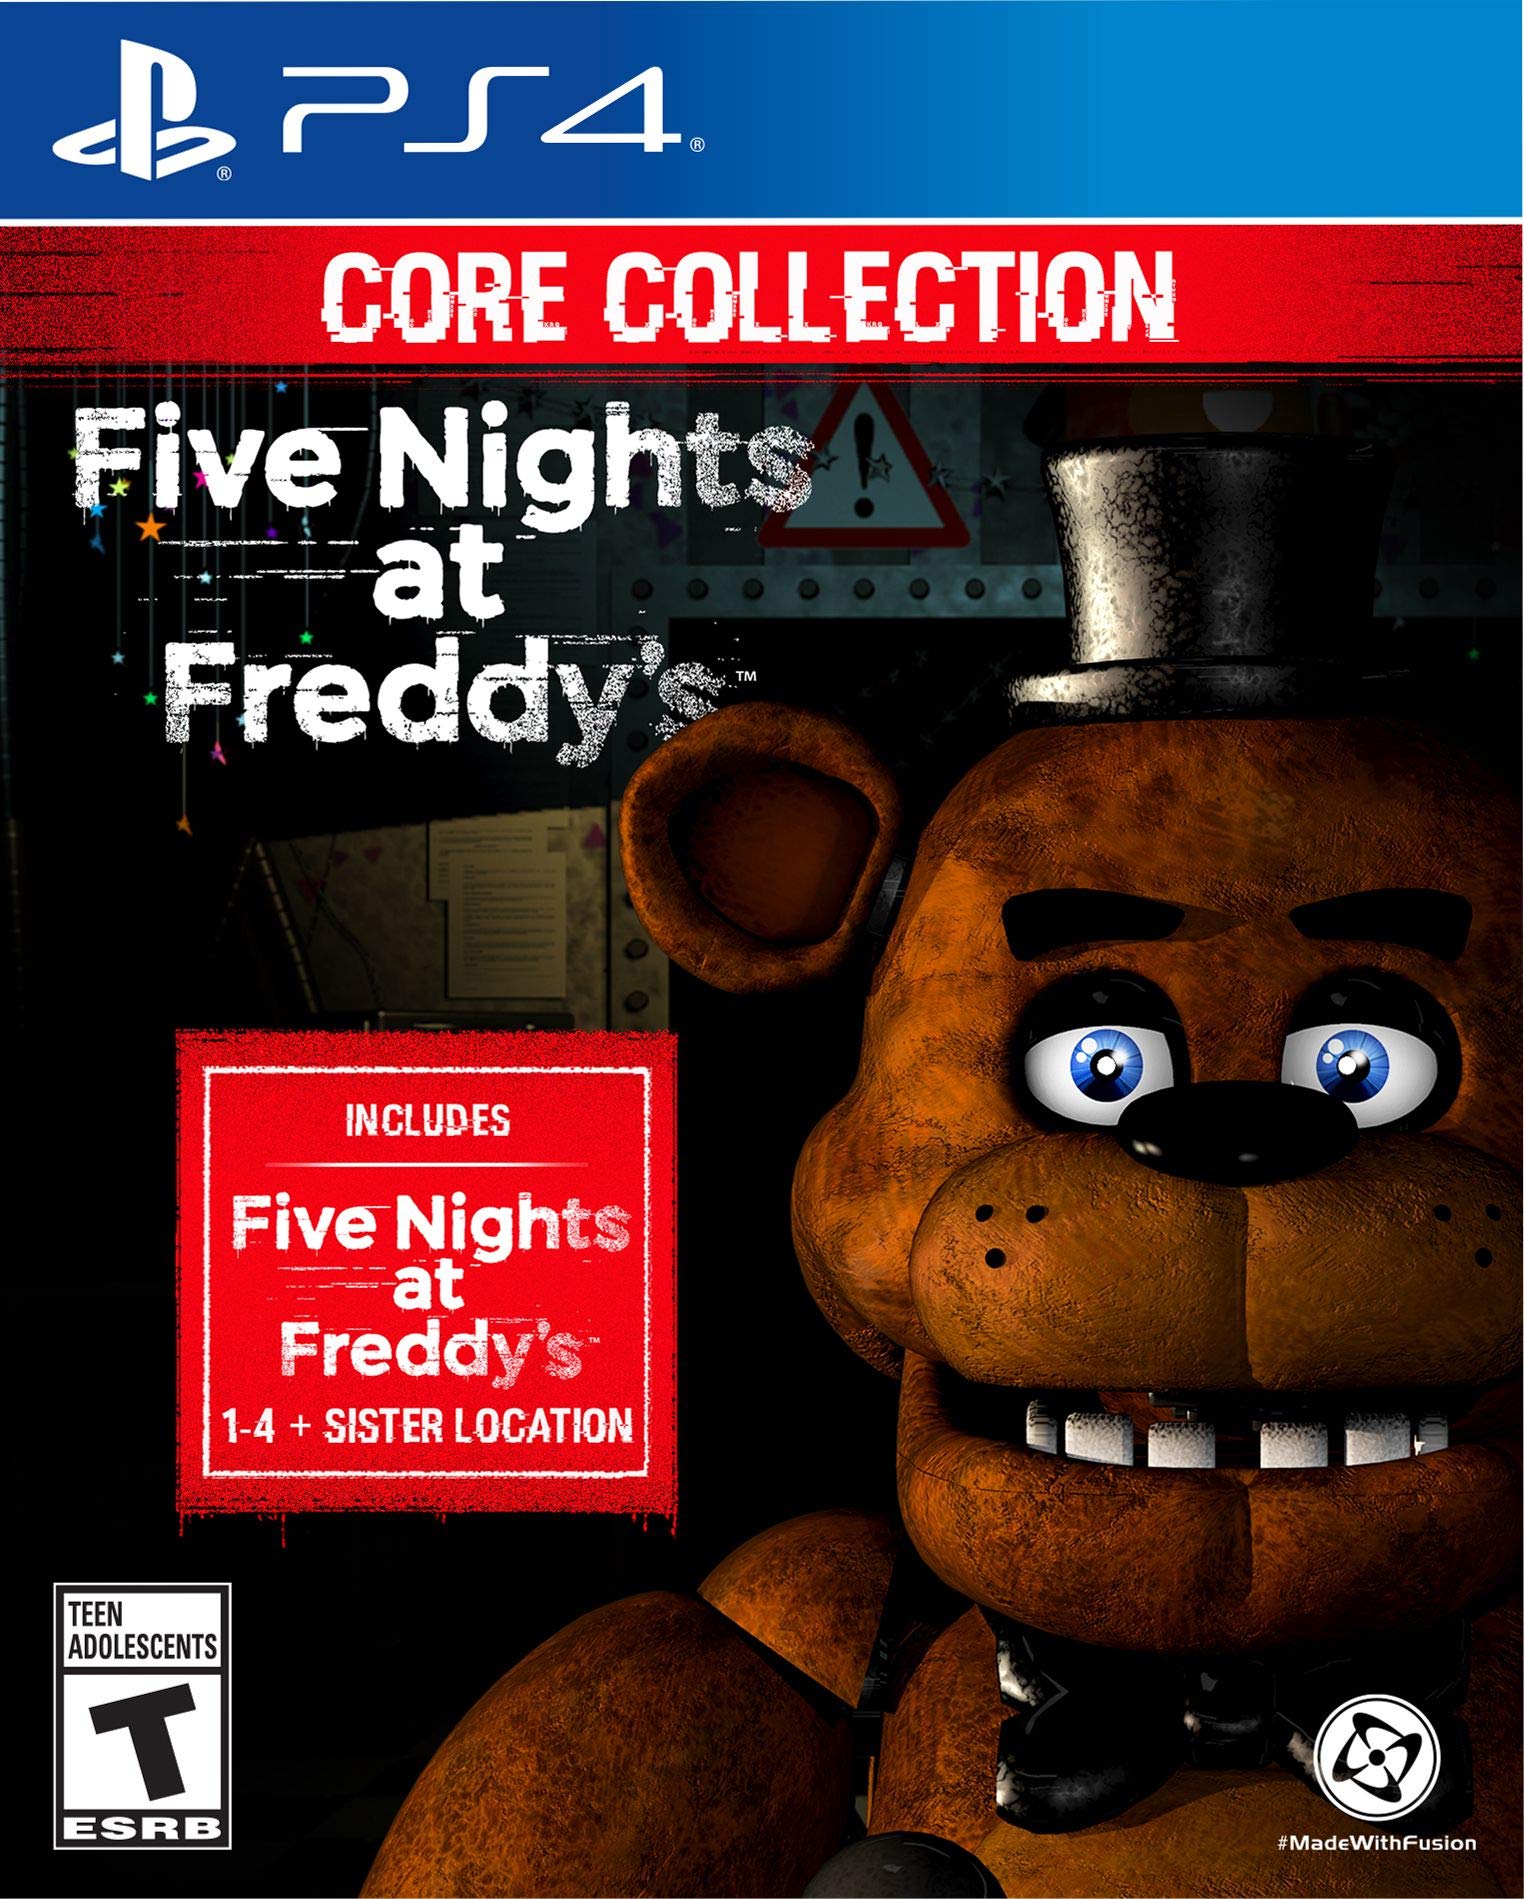 Five Nights At Freddy's 5 Release Date